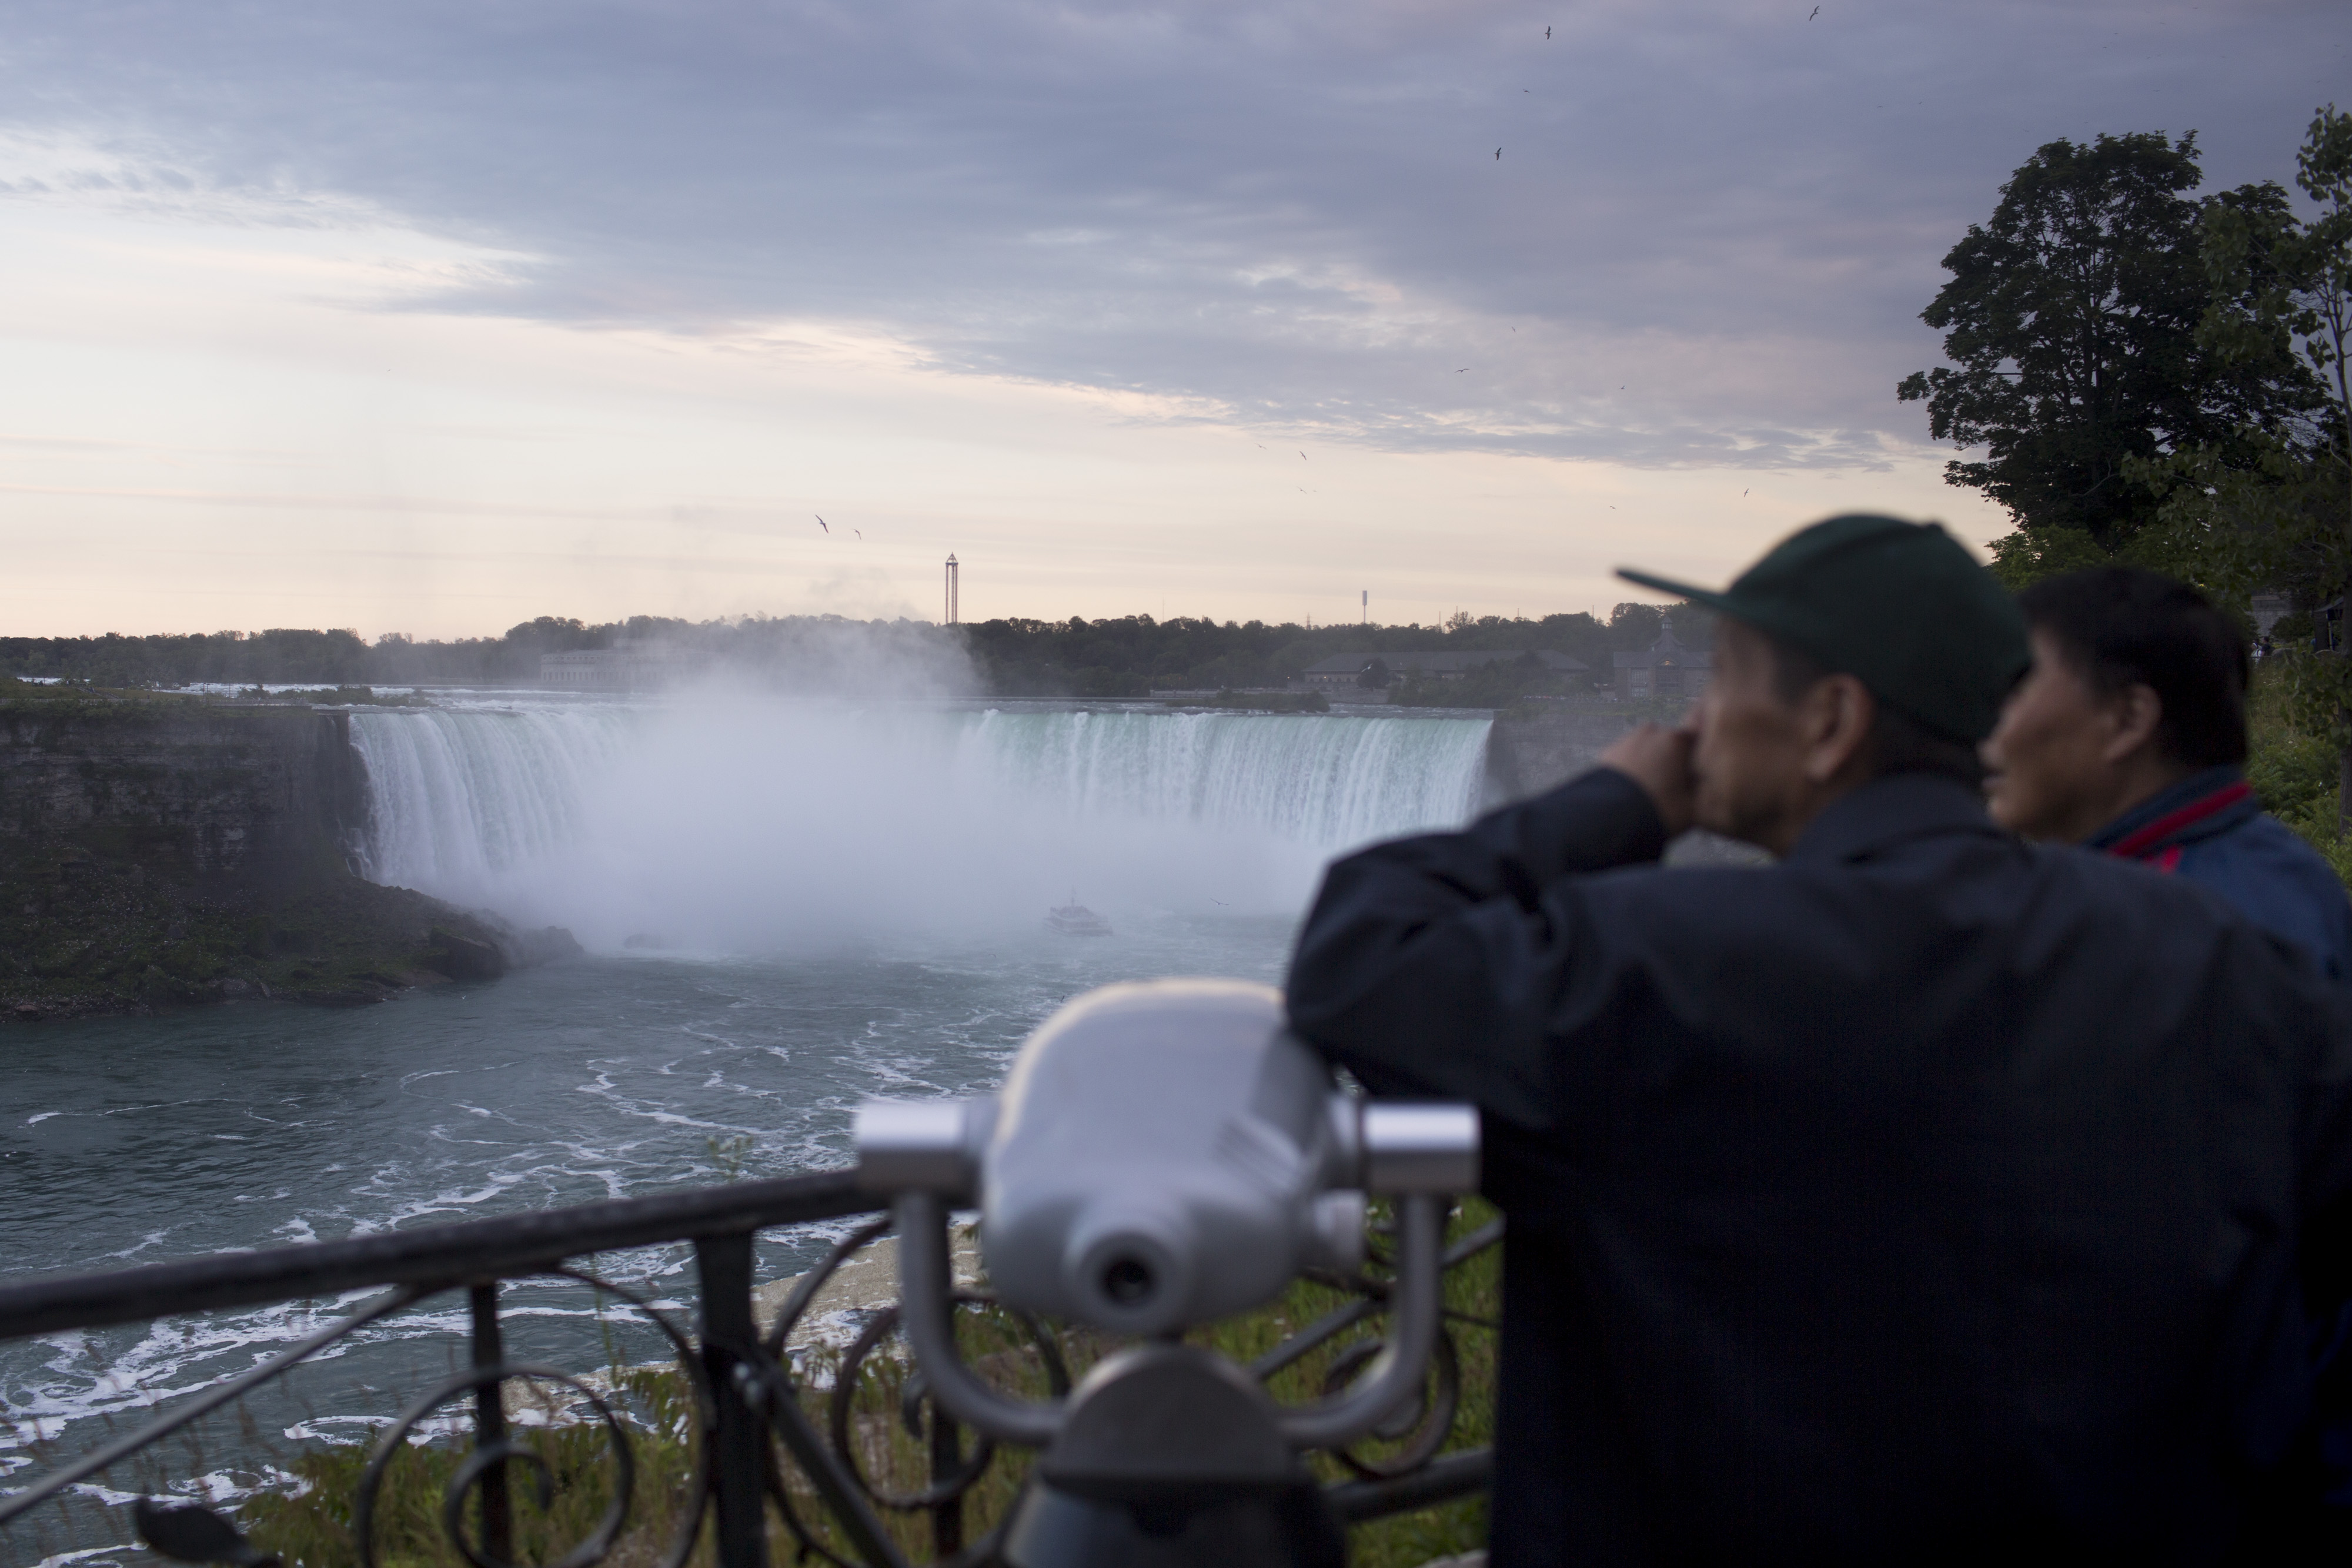 Tourists stand in front of the Horseshoe Falls in Niagara Falls, Ontario, Canada, on Wednesday, June 21, 2017. (Brent Lewin—Bloomberg/Getty Images)